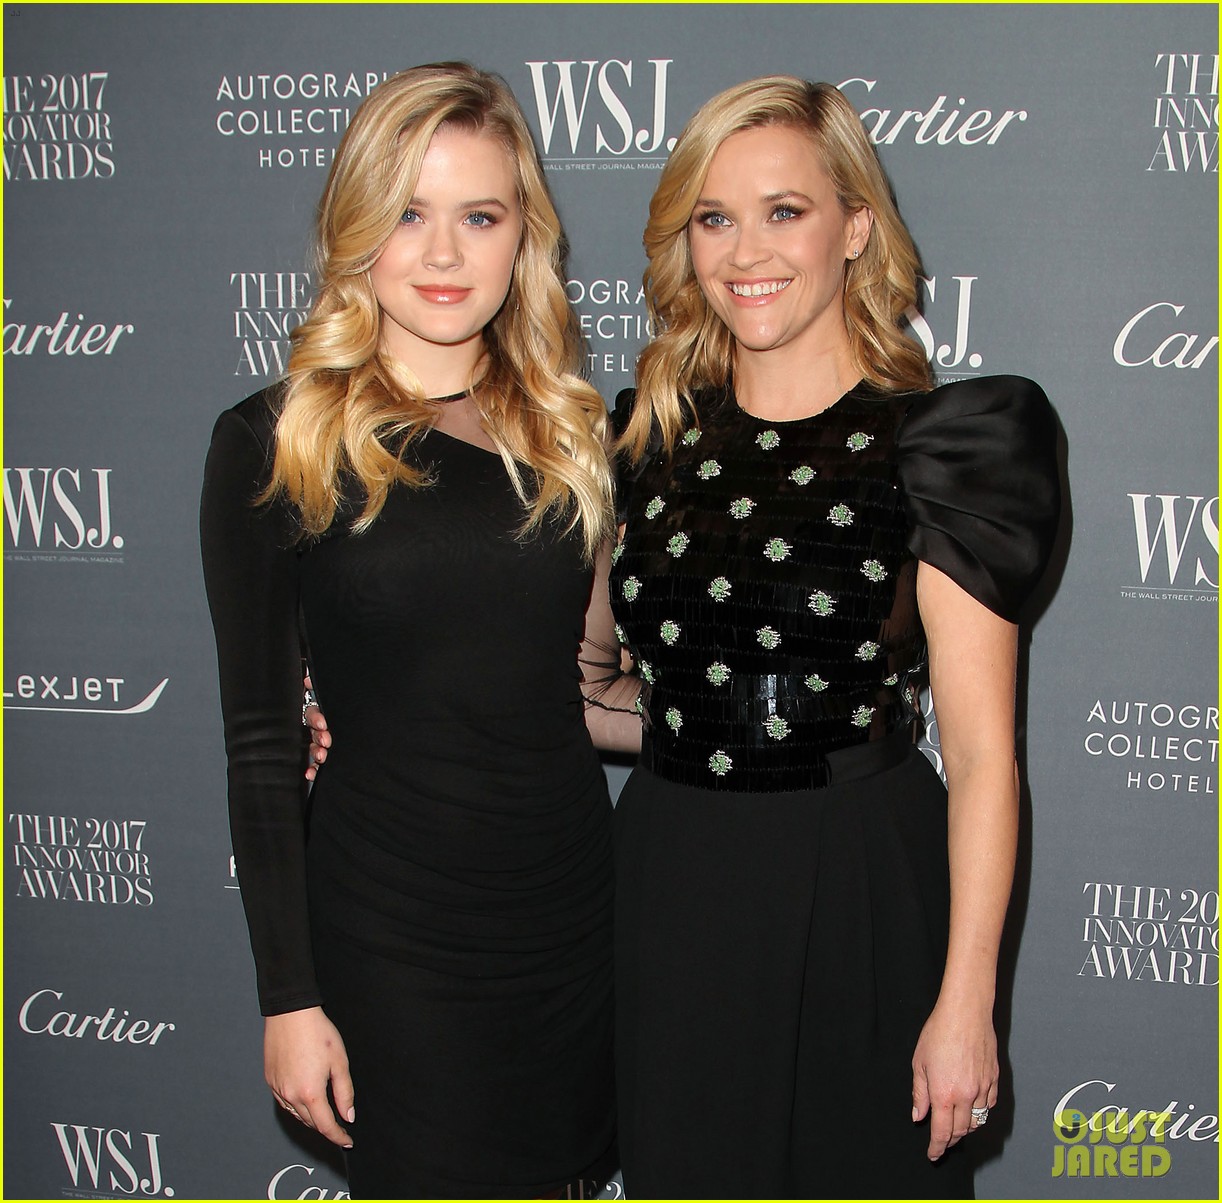 reese-witherspoon-ava-phillippe-celebrate-her-wsj-cover-at-innovator-awards-04.JPG